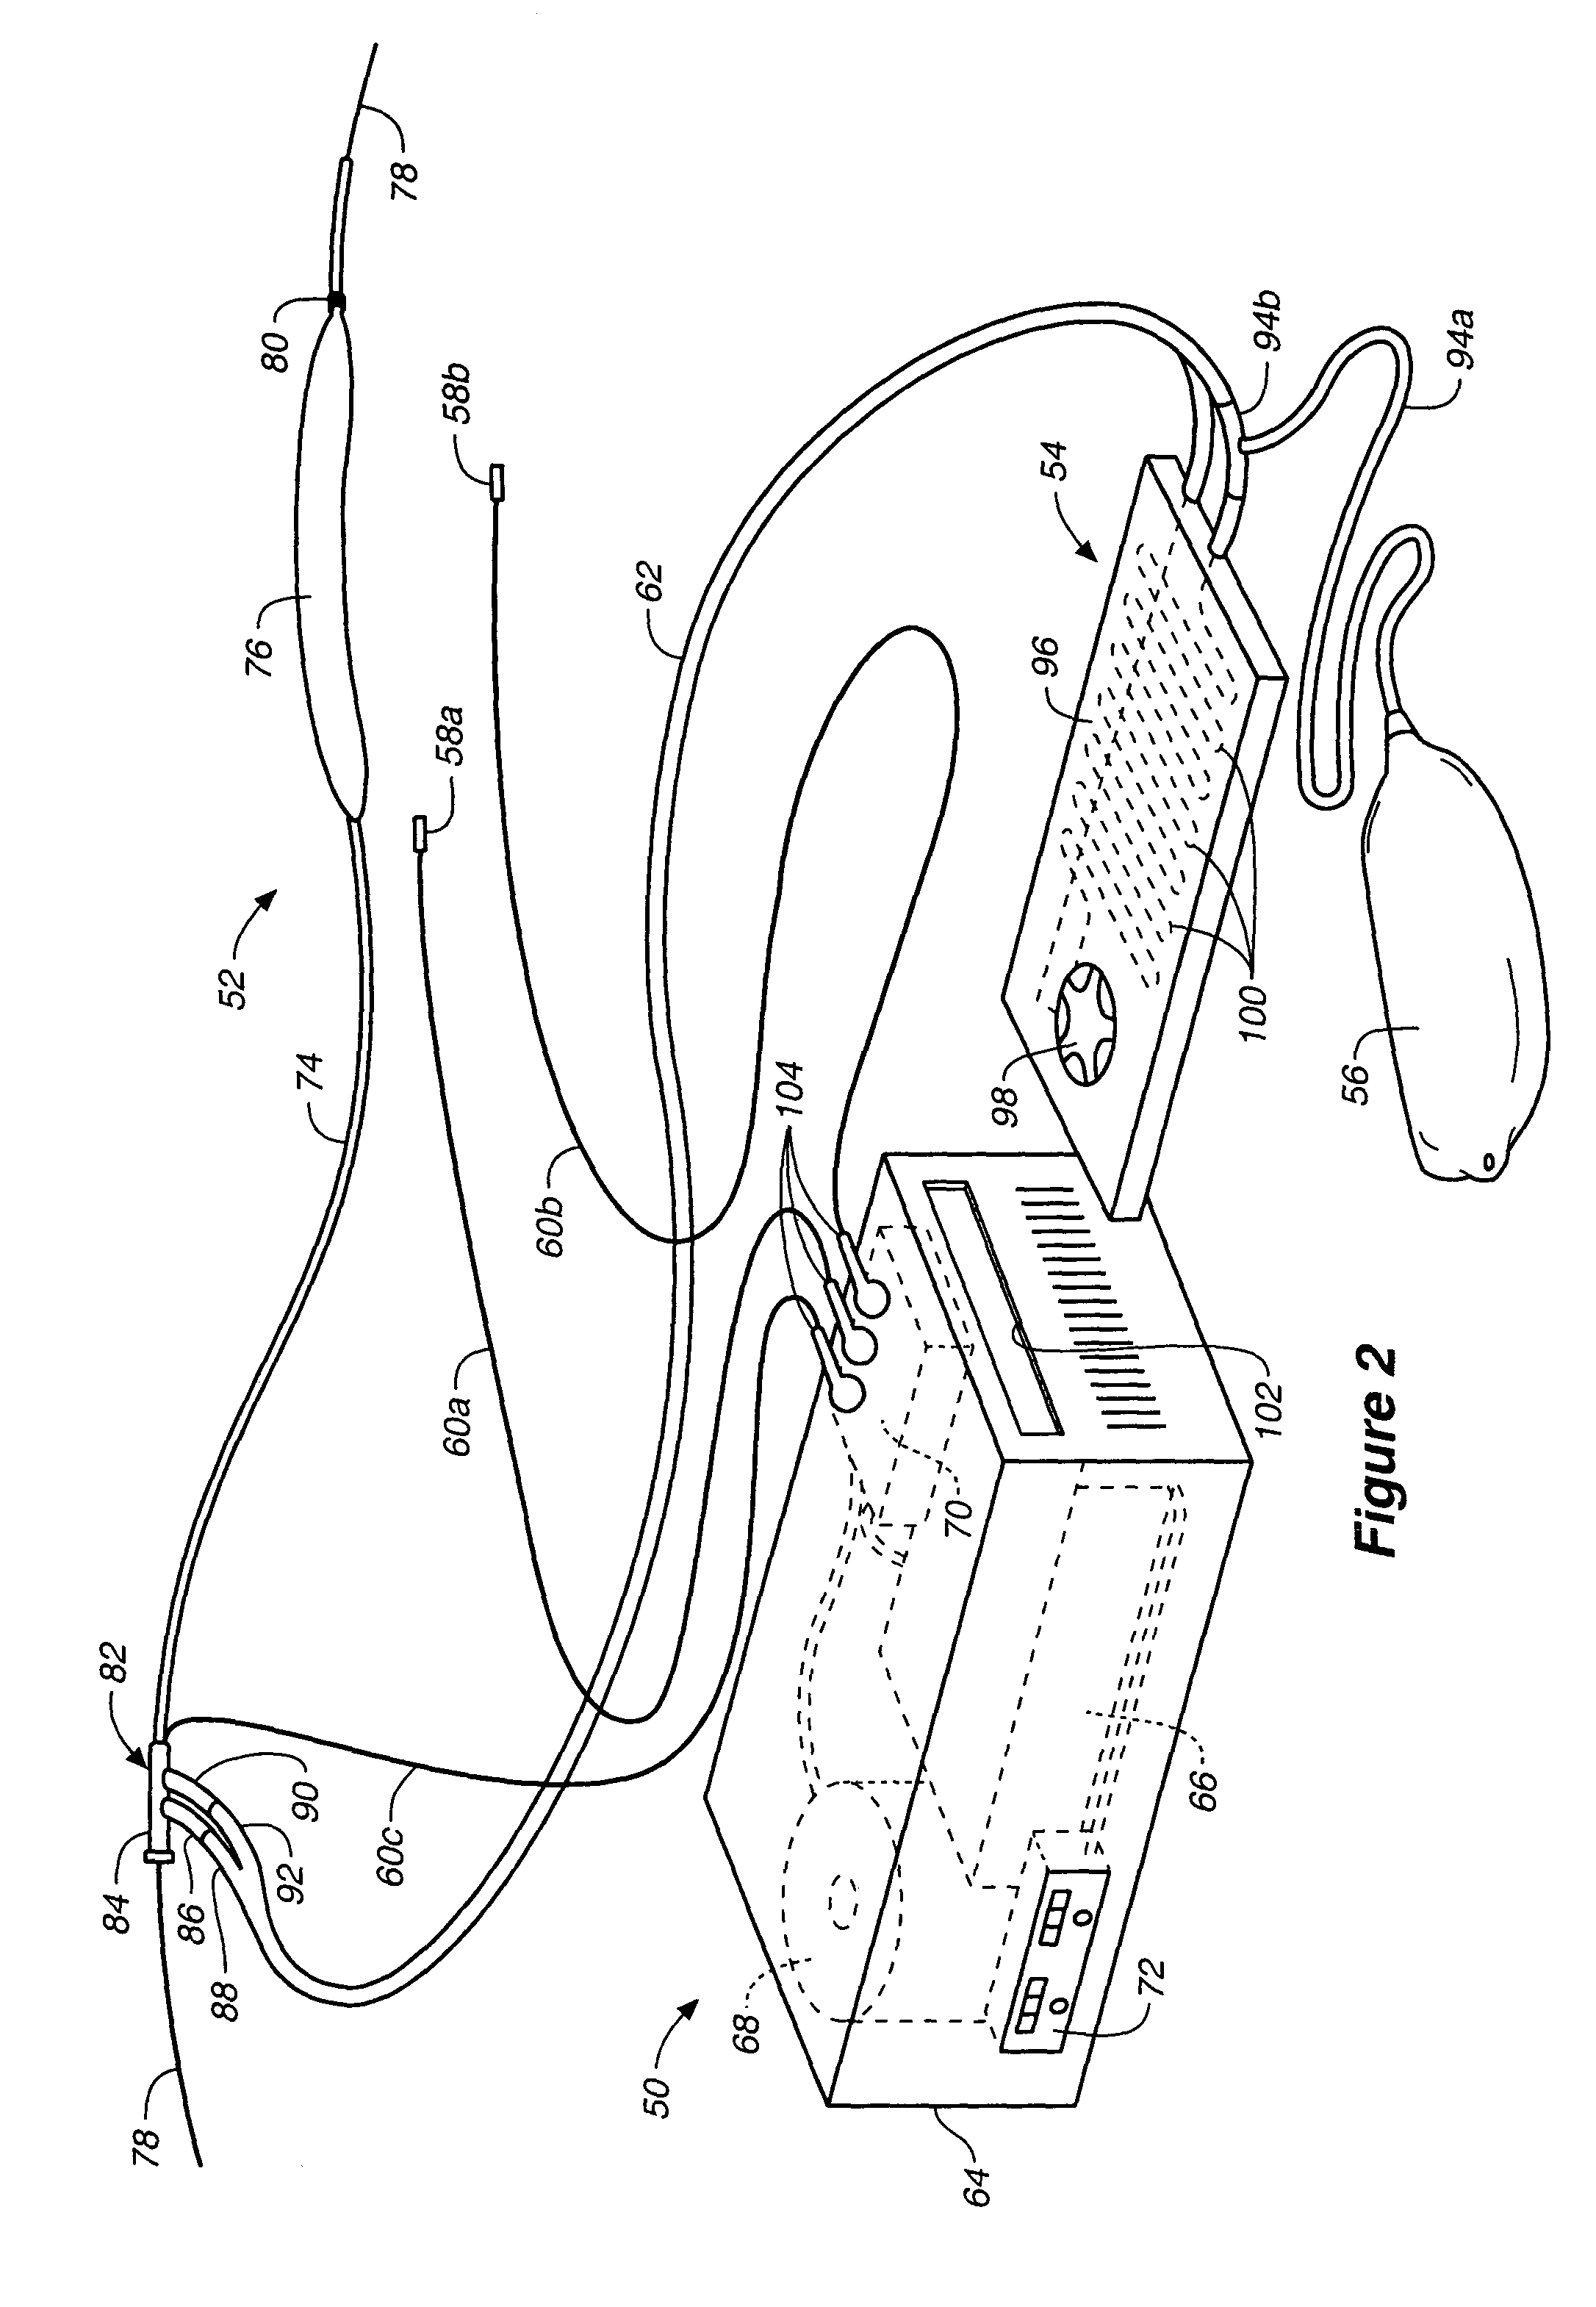 Method and system for control of a patient's body temperature by way of transluminally insertable heat exchange catheter